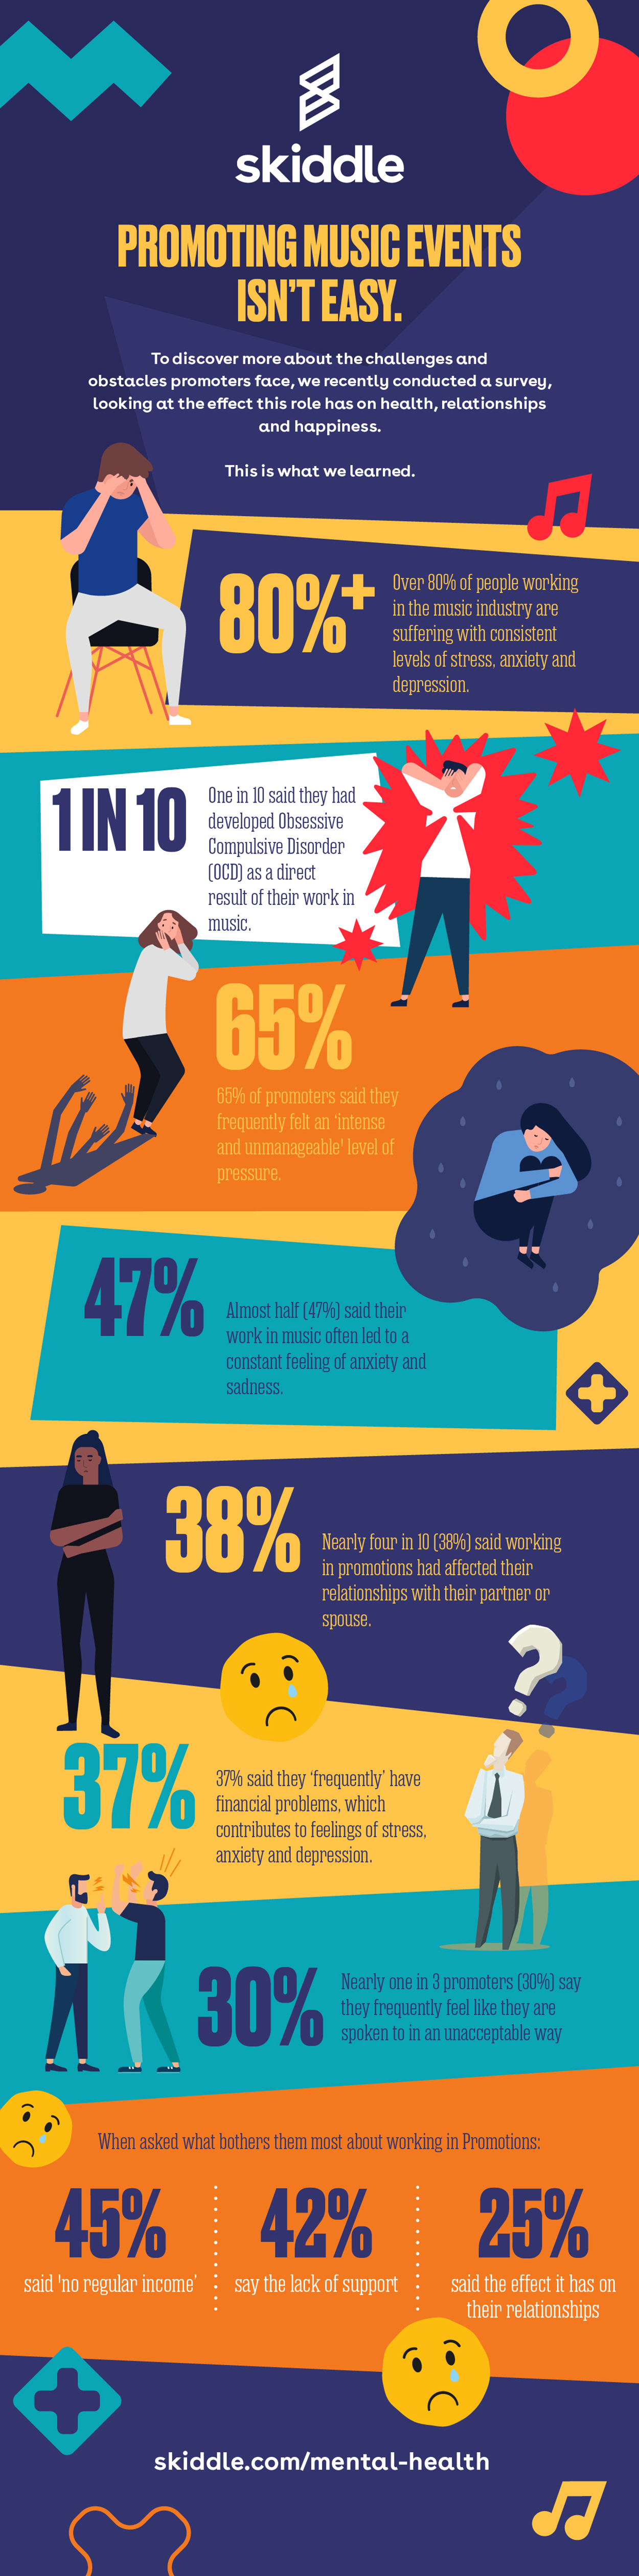 Skiddle mental health infographic